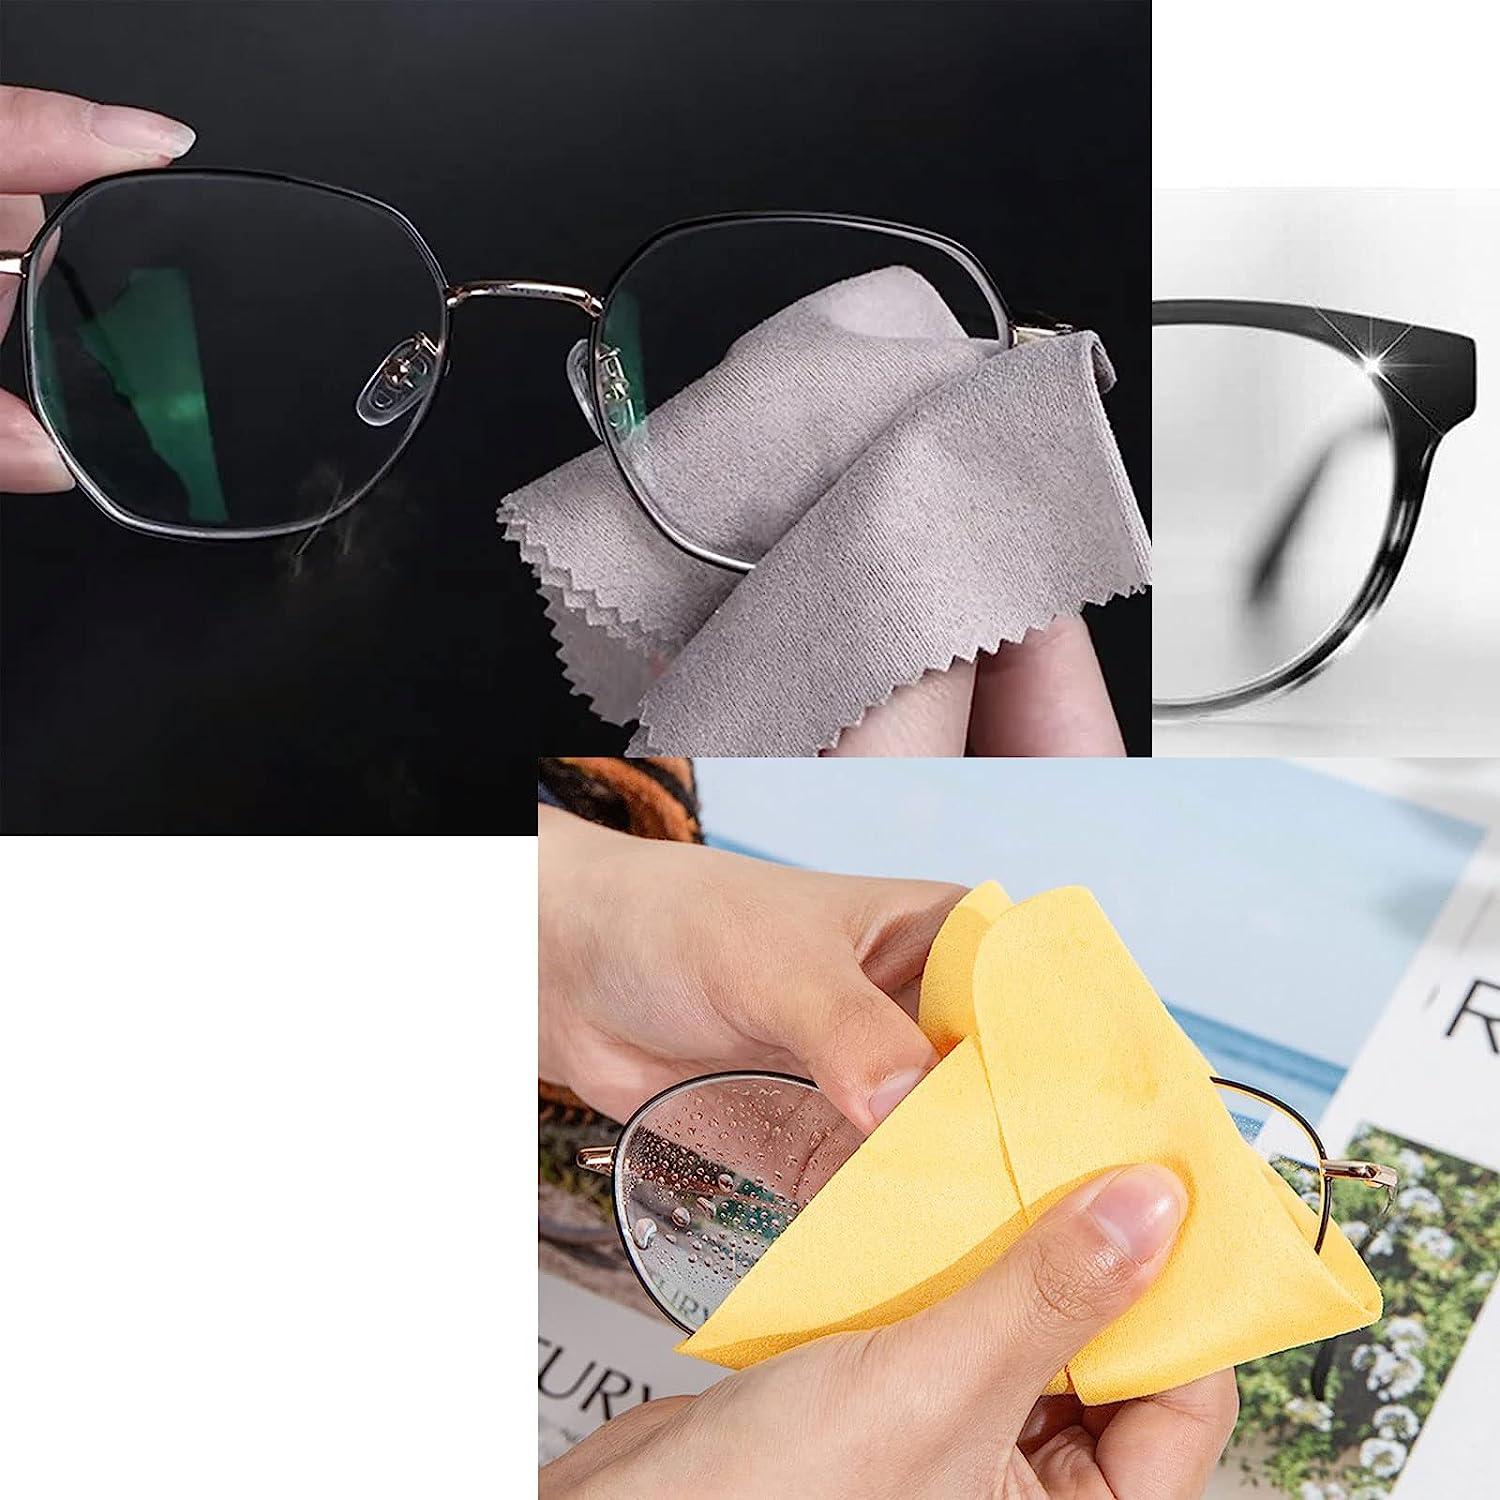  New Lens Scratch Removal Spray, Eyeglass Windshield Glass  Repair Liquid, Eyeglass Glass Scratch Repair Solution, Glasses Cleaner  Spray for Sunglasses Screen Cleaner Tools (5pc) : Health & Household